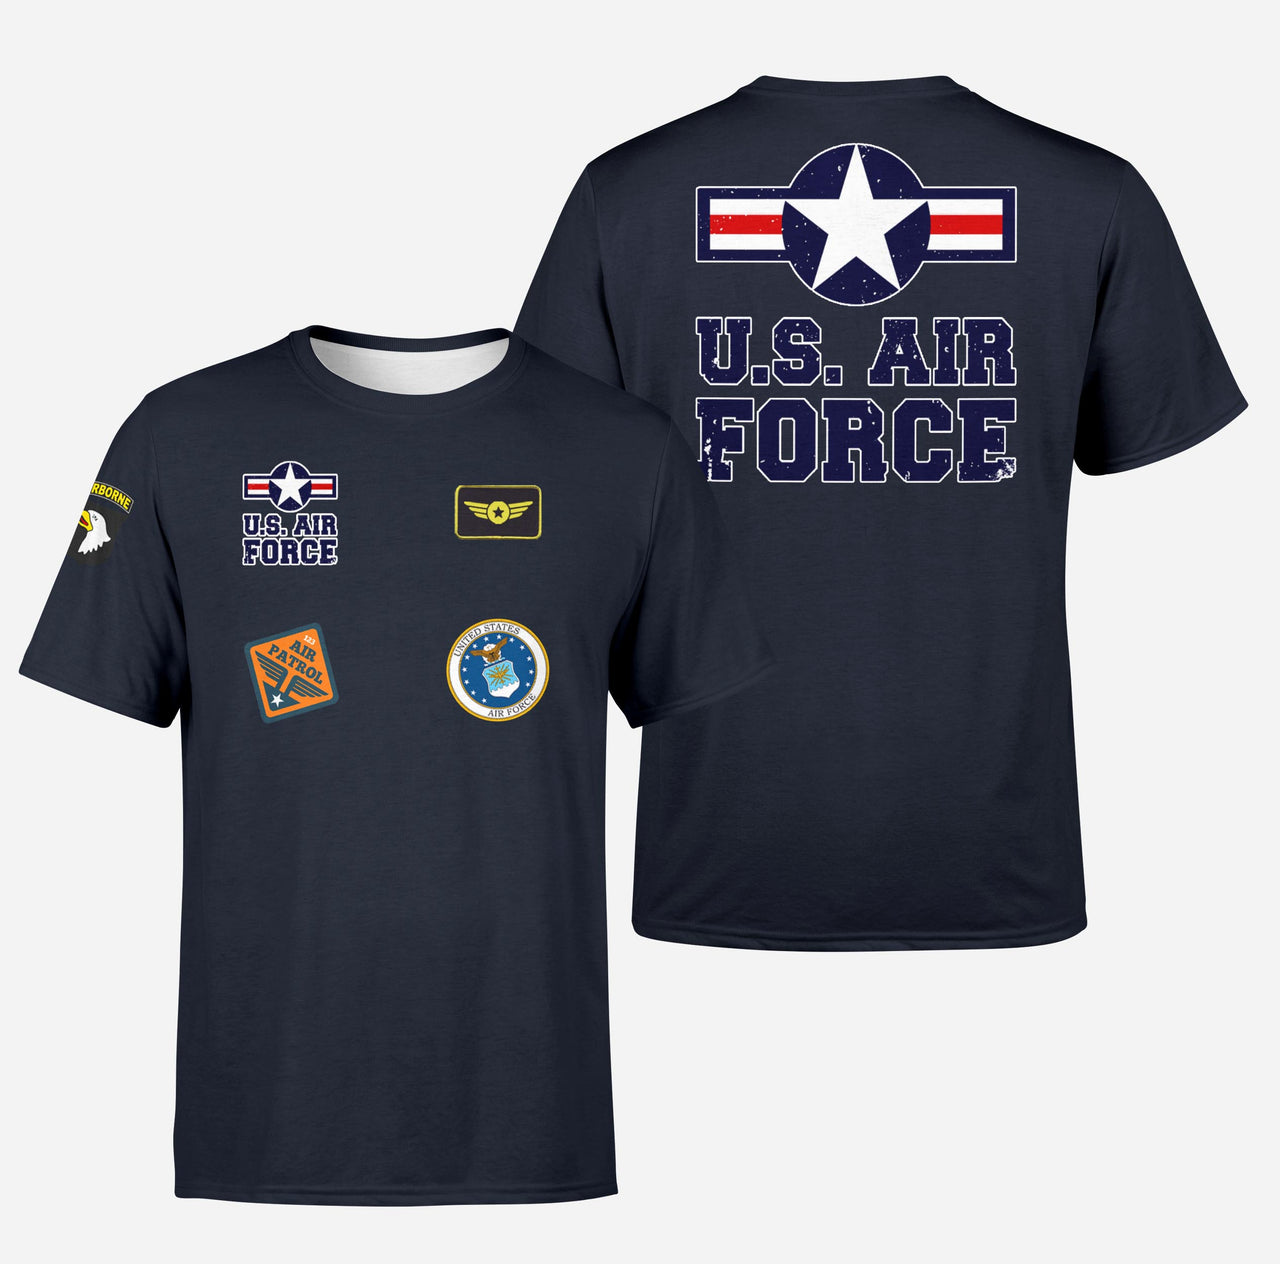 US Air Force + Patches Designed T-Shirts